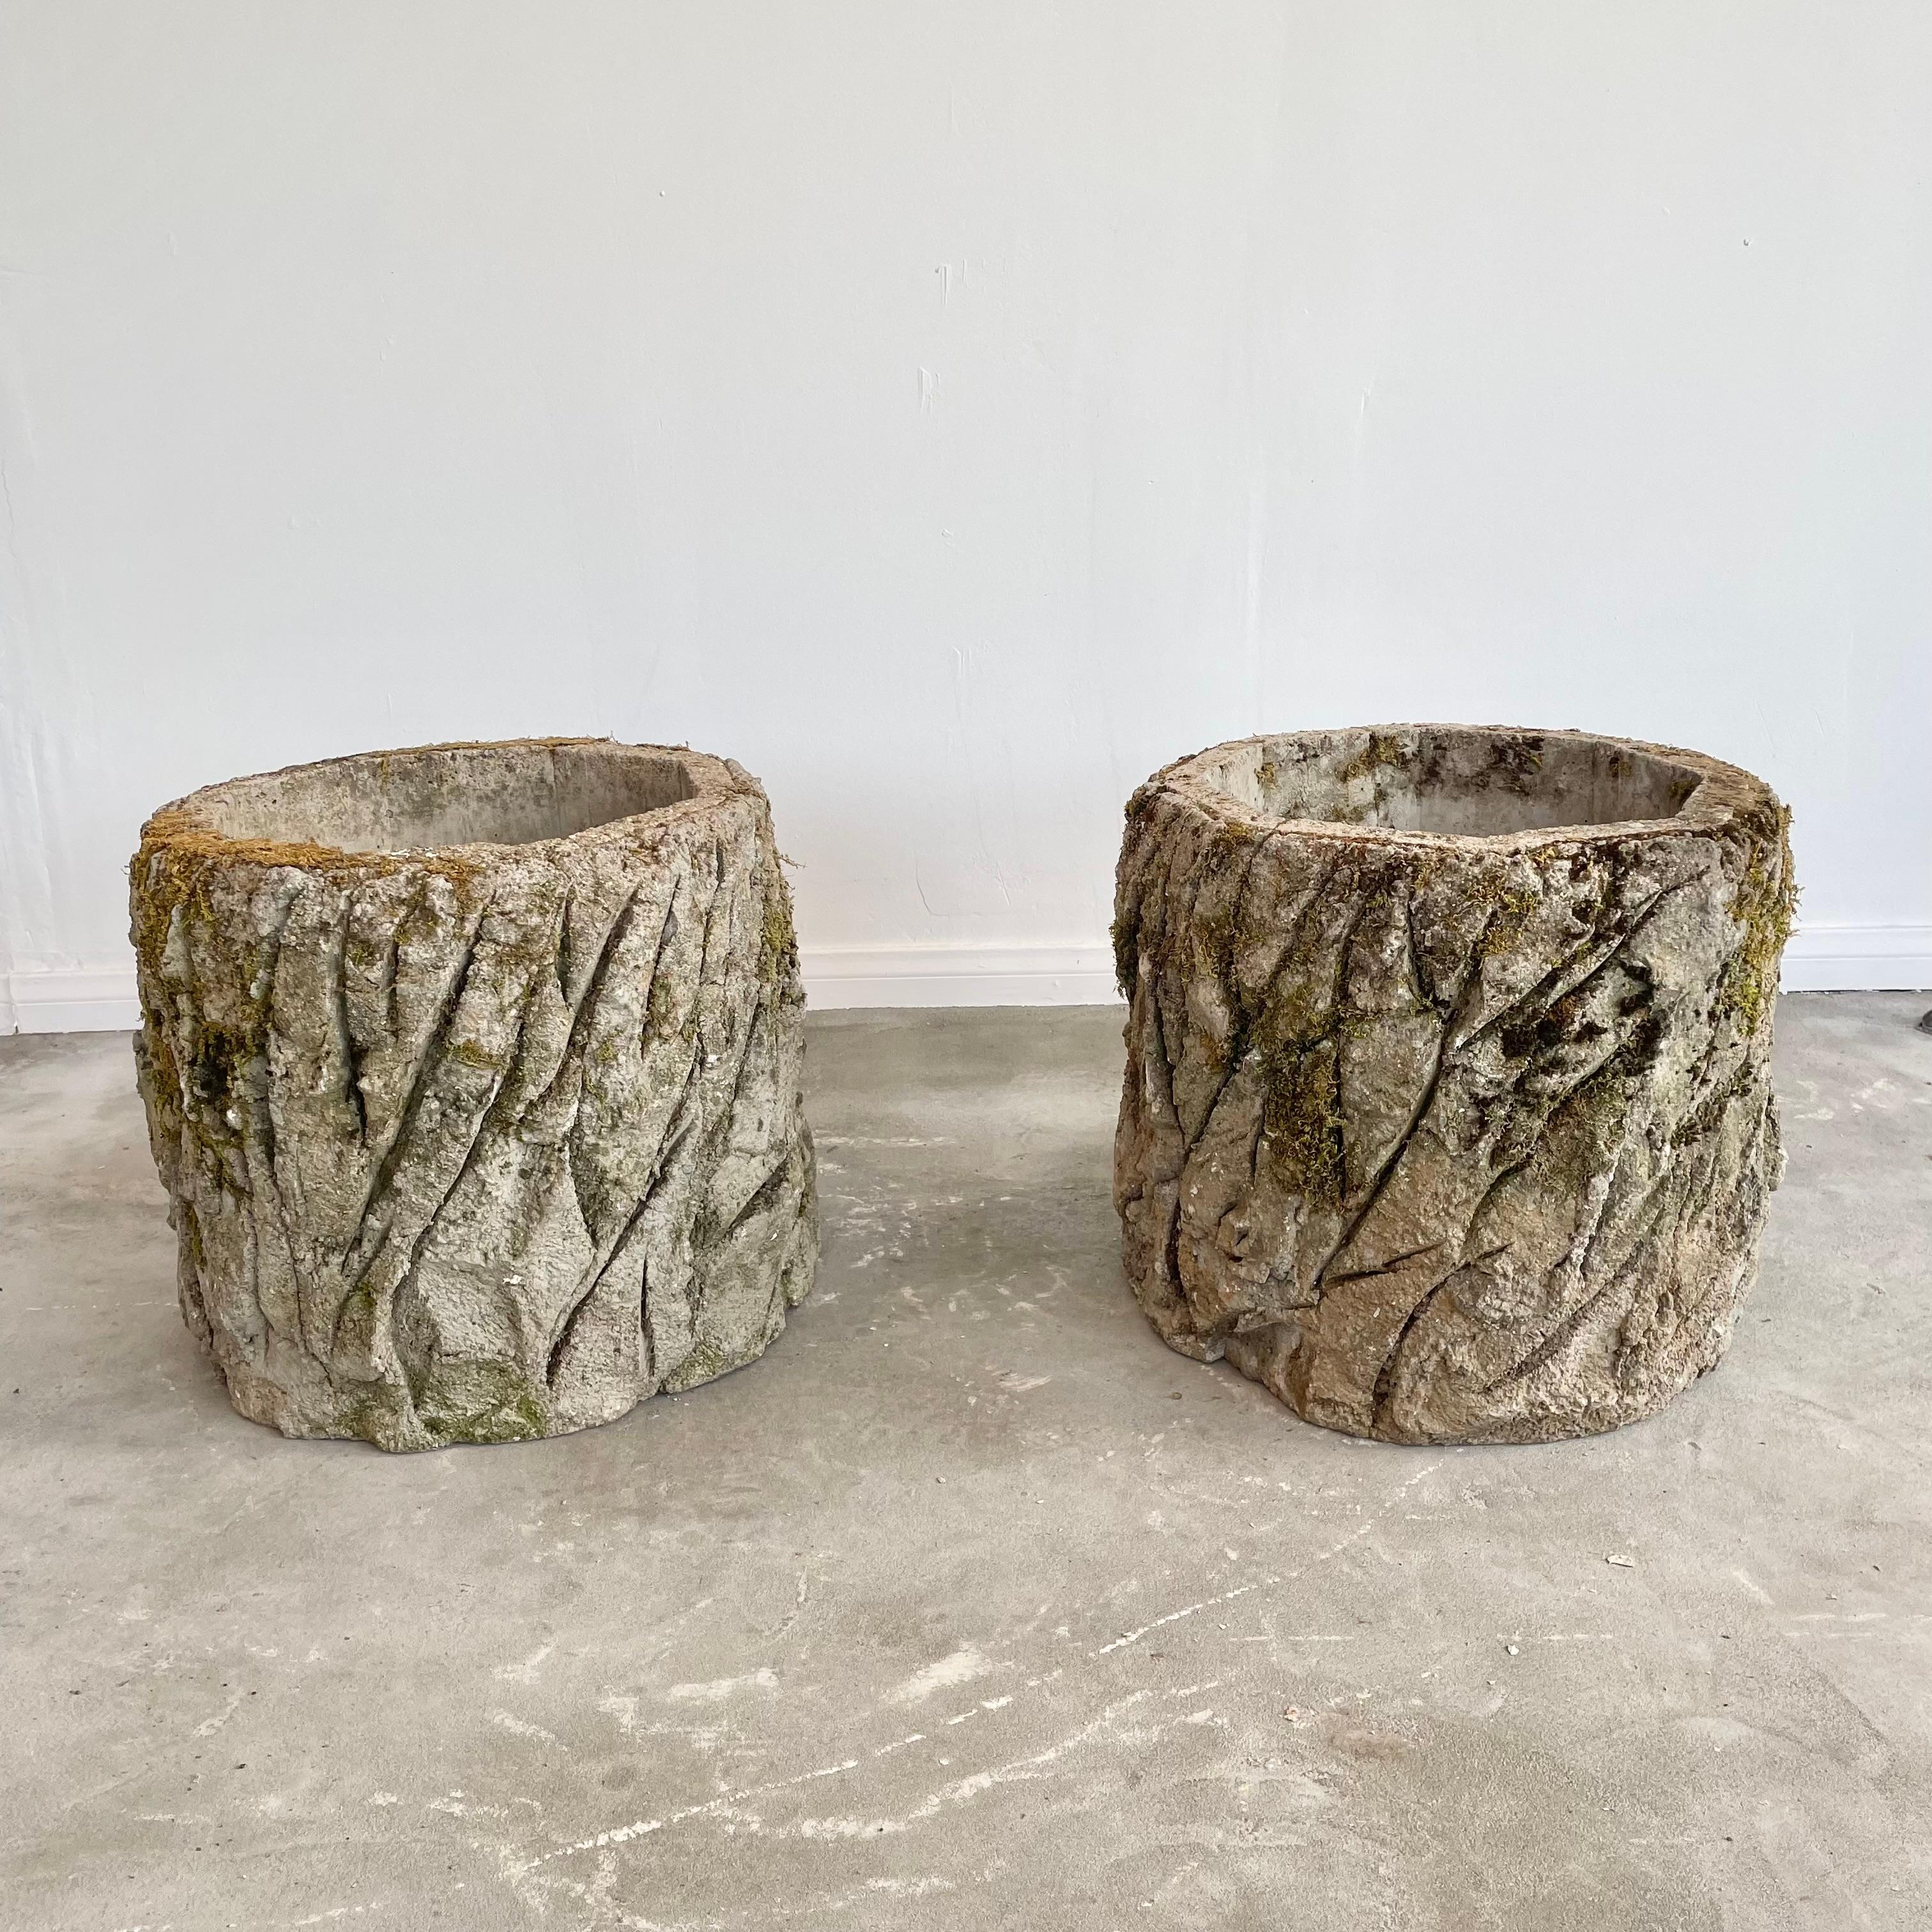 Stunning concrete faux-bois planter, circa 1970s. Detailed design including realistic bark and wood grain. Natural lichen and moss growth also lend in giving this planter an uncanny realistic feel without it being too gimmicky. Years of patina and